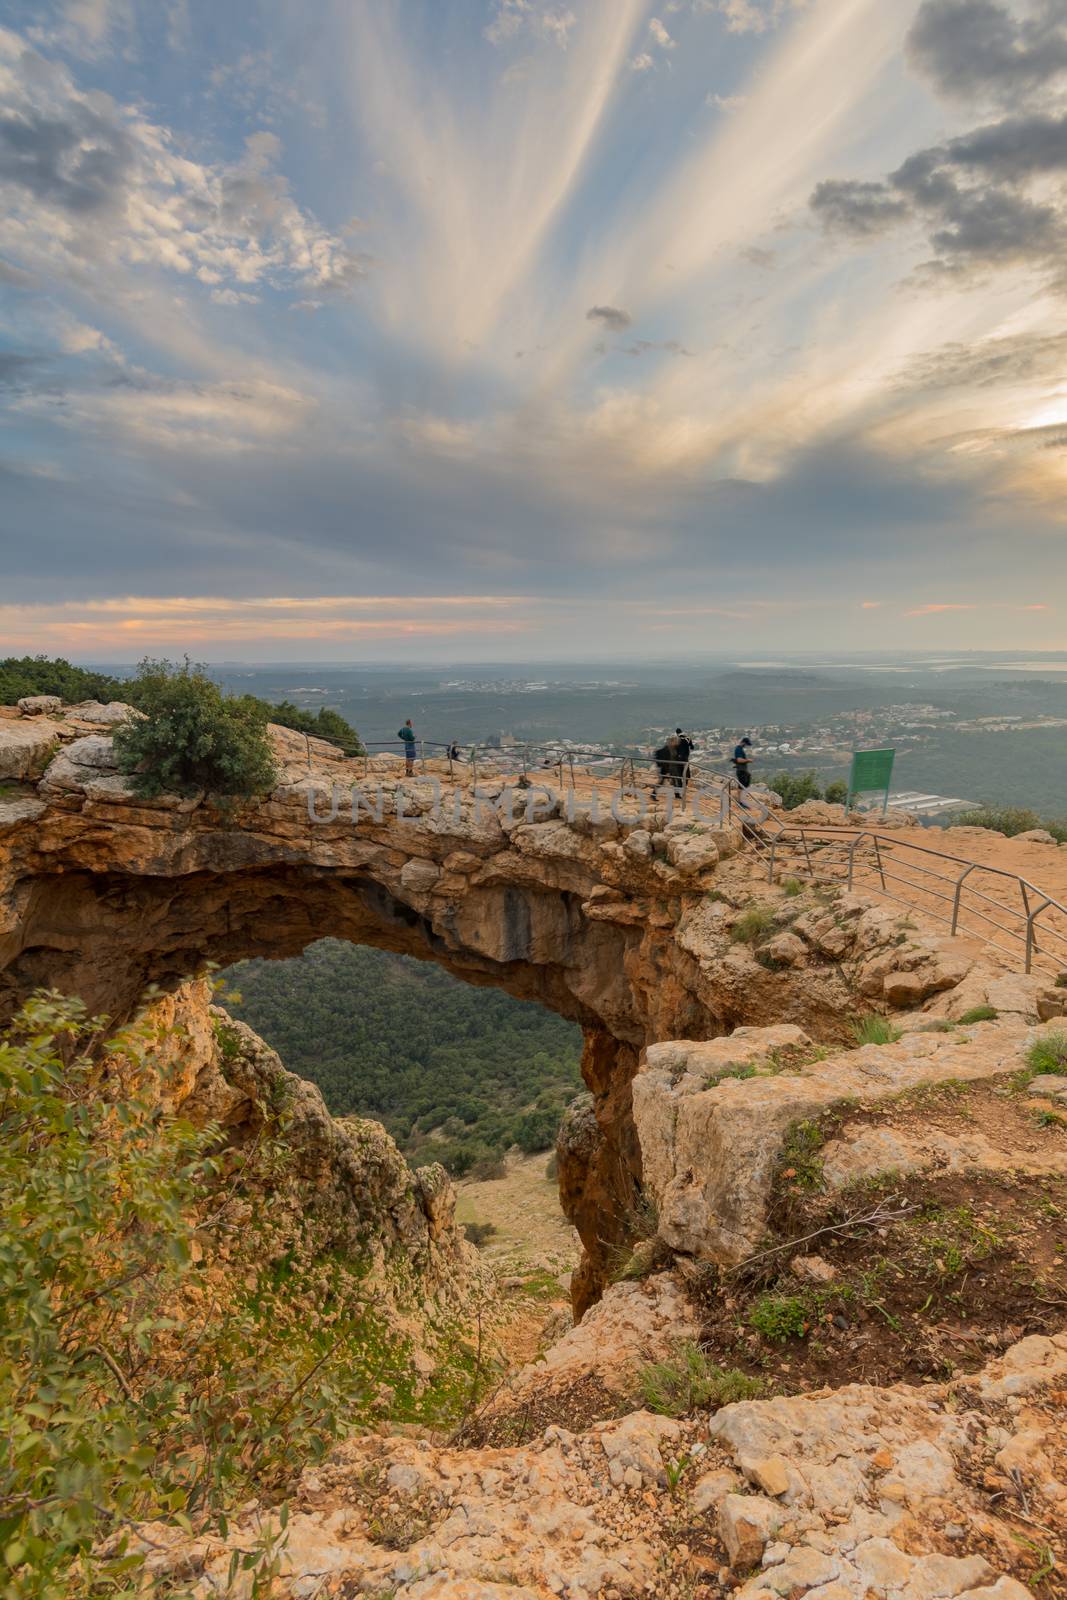 Sunset view of the Keshet Cave by RnDmS